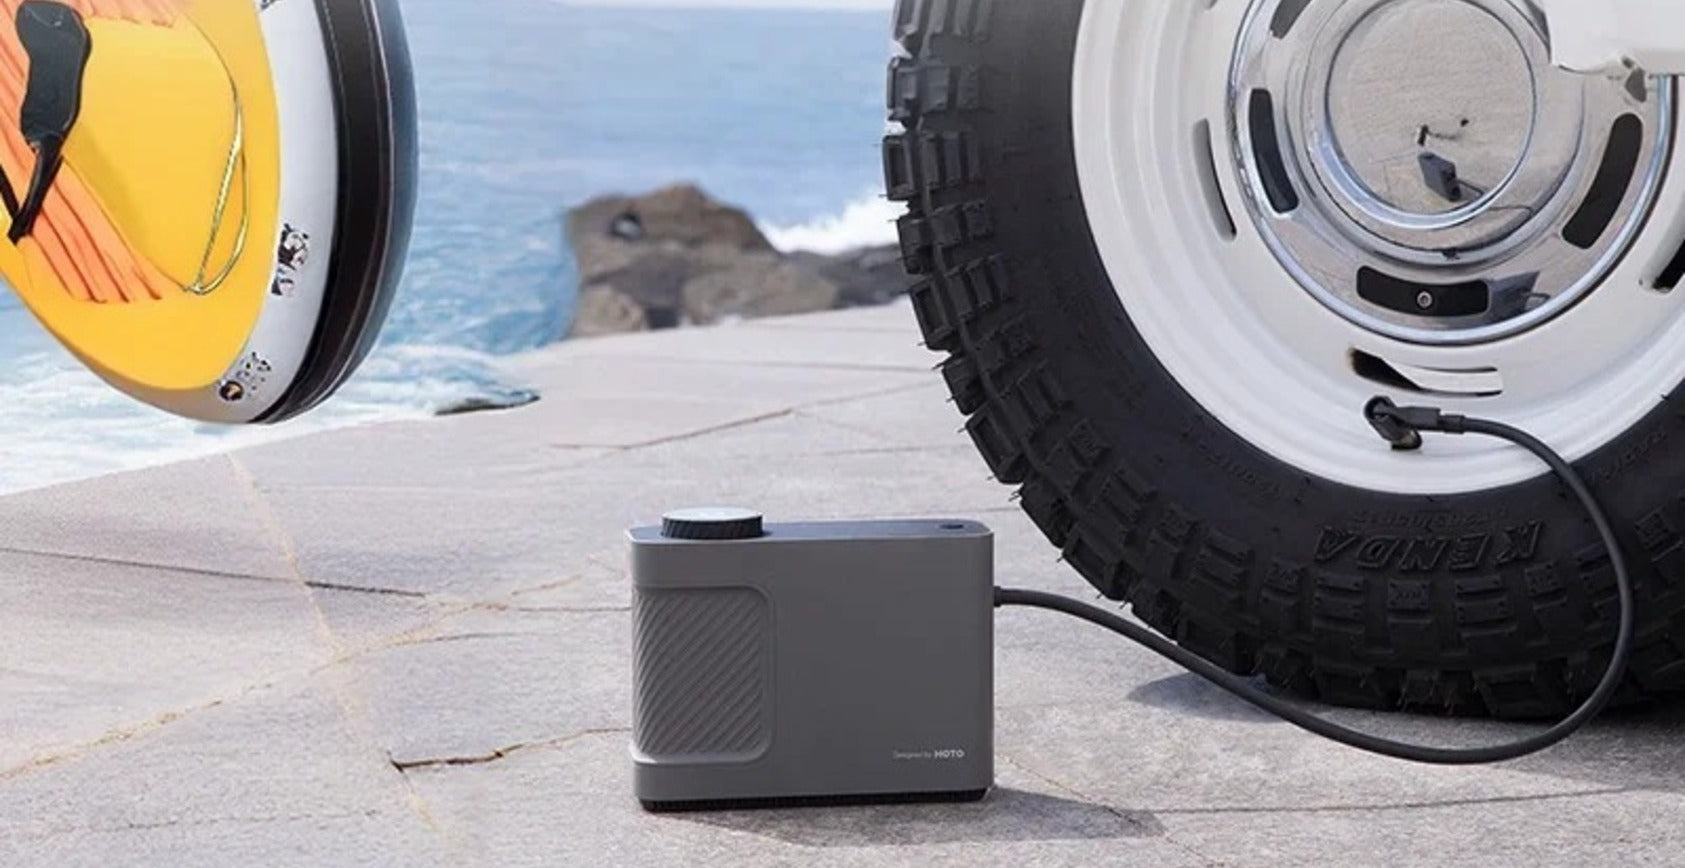 What happens if tires are overinflated: a smart air pump is needed